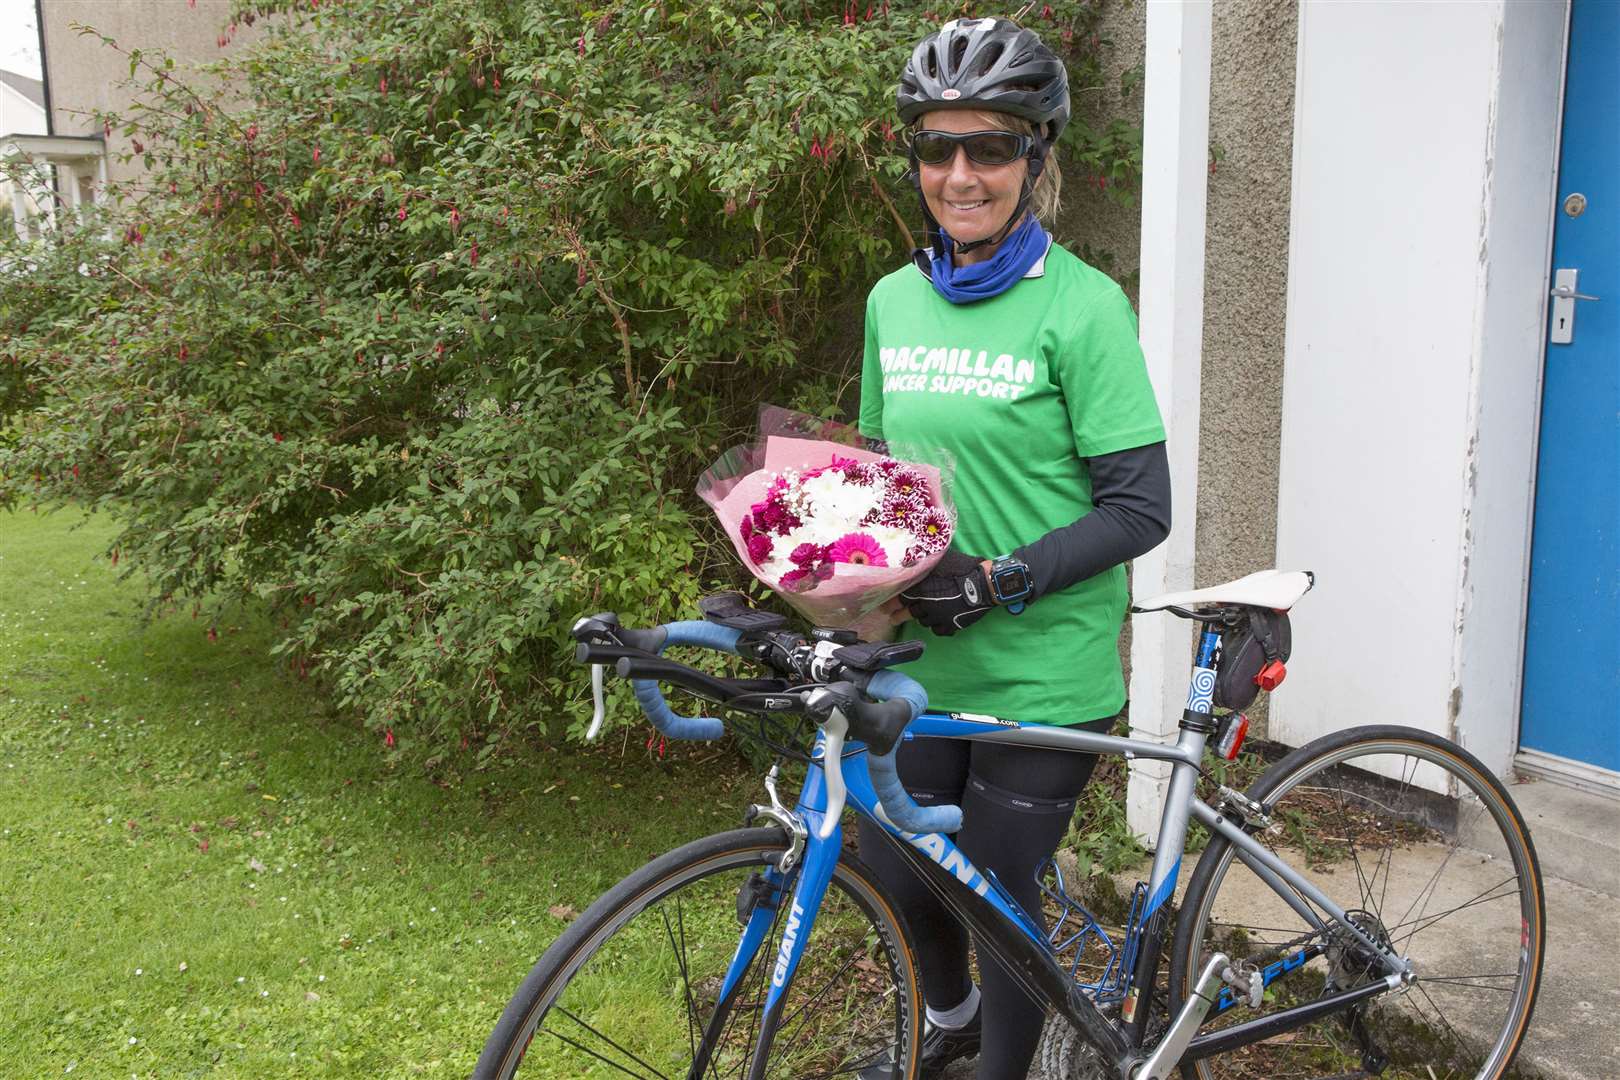 Home at 7.24am on Saturday, after just over five days on the road and having completed 755 miles, Lorna poses for a photo with a bunch of flowers received from her sister along with the Macmillan Cancer supporters' T-shirt. Picture: Robert MacDonald / Northern Studios